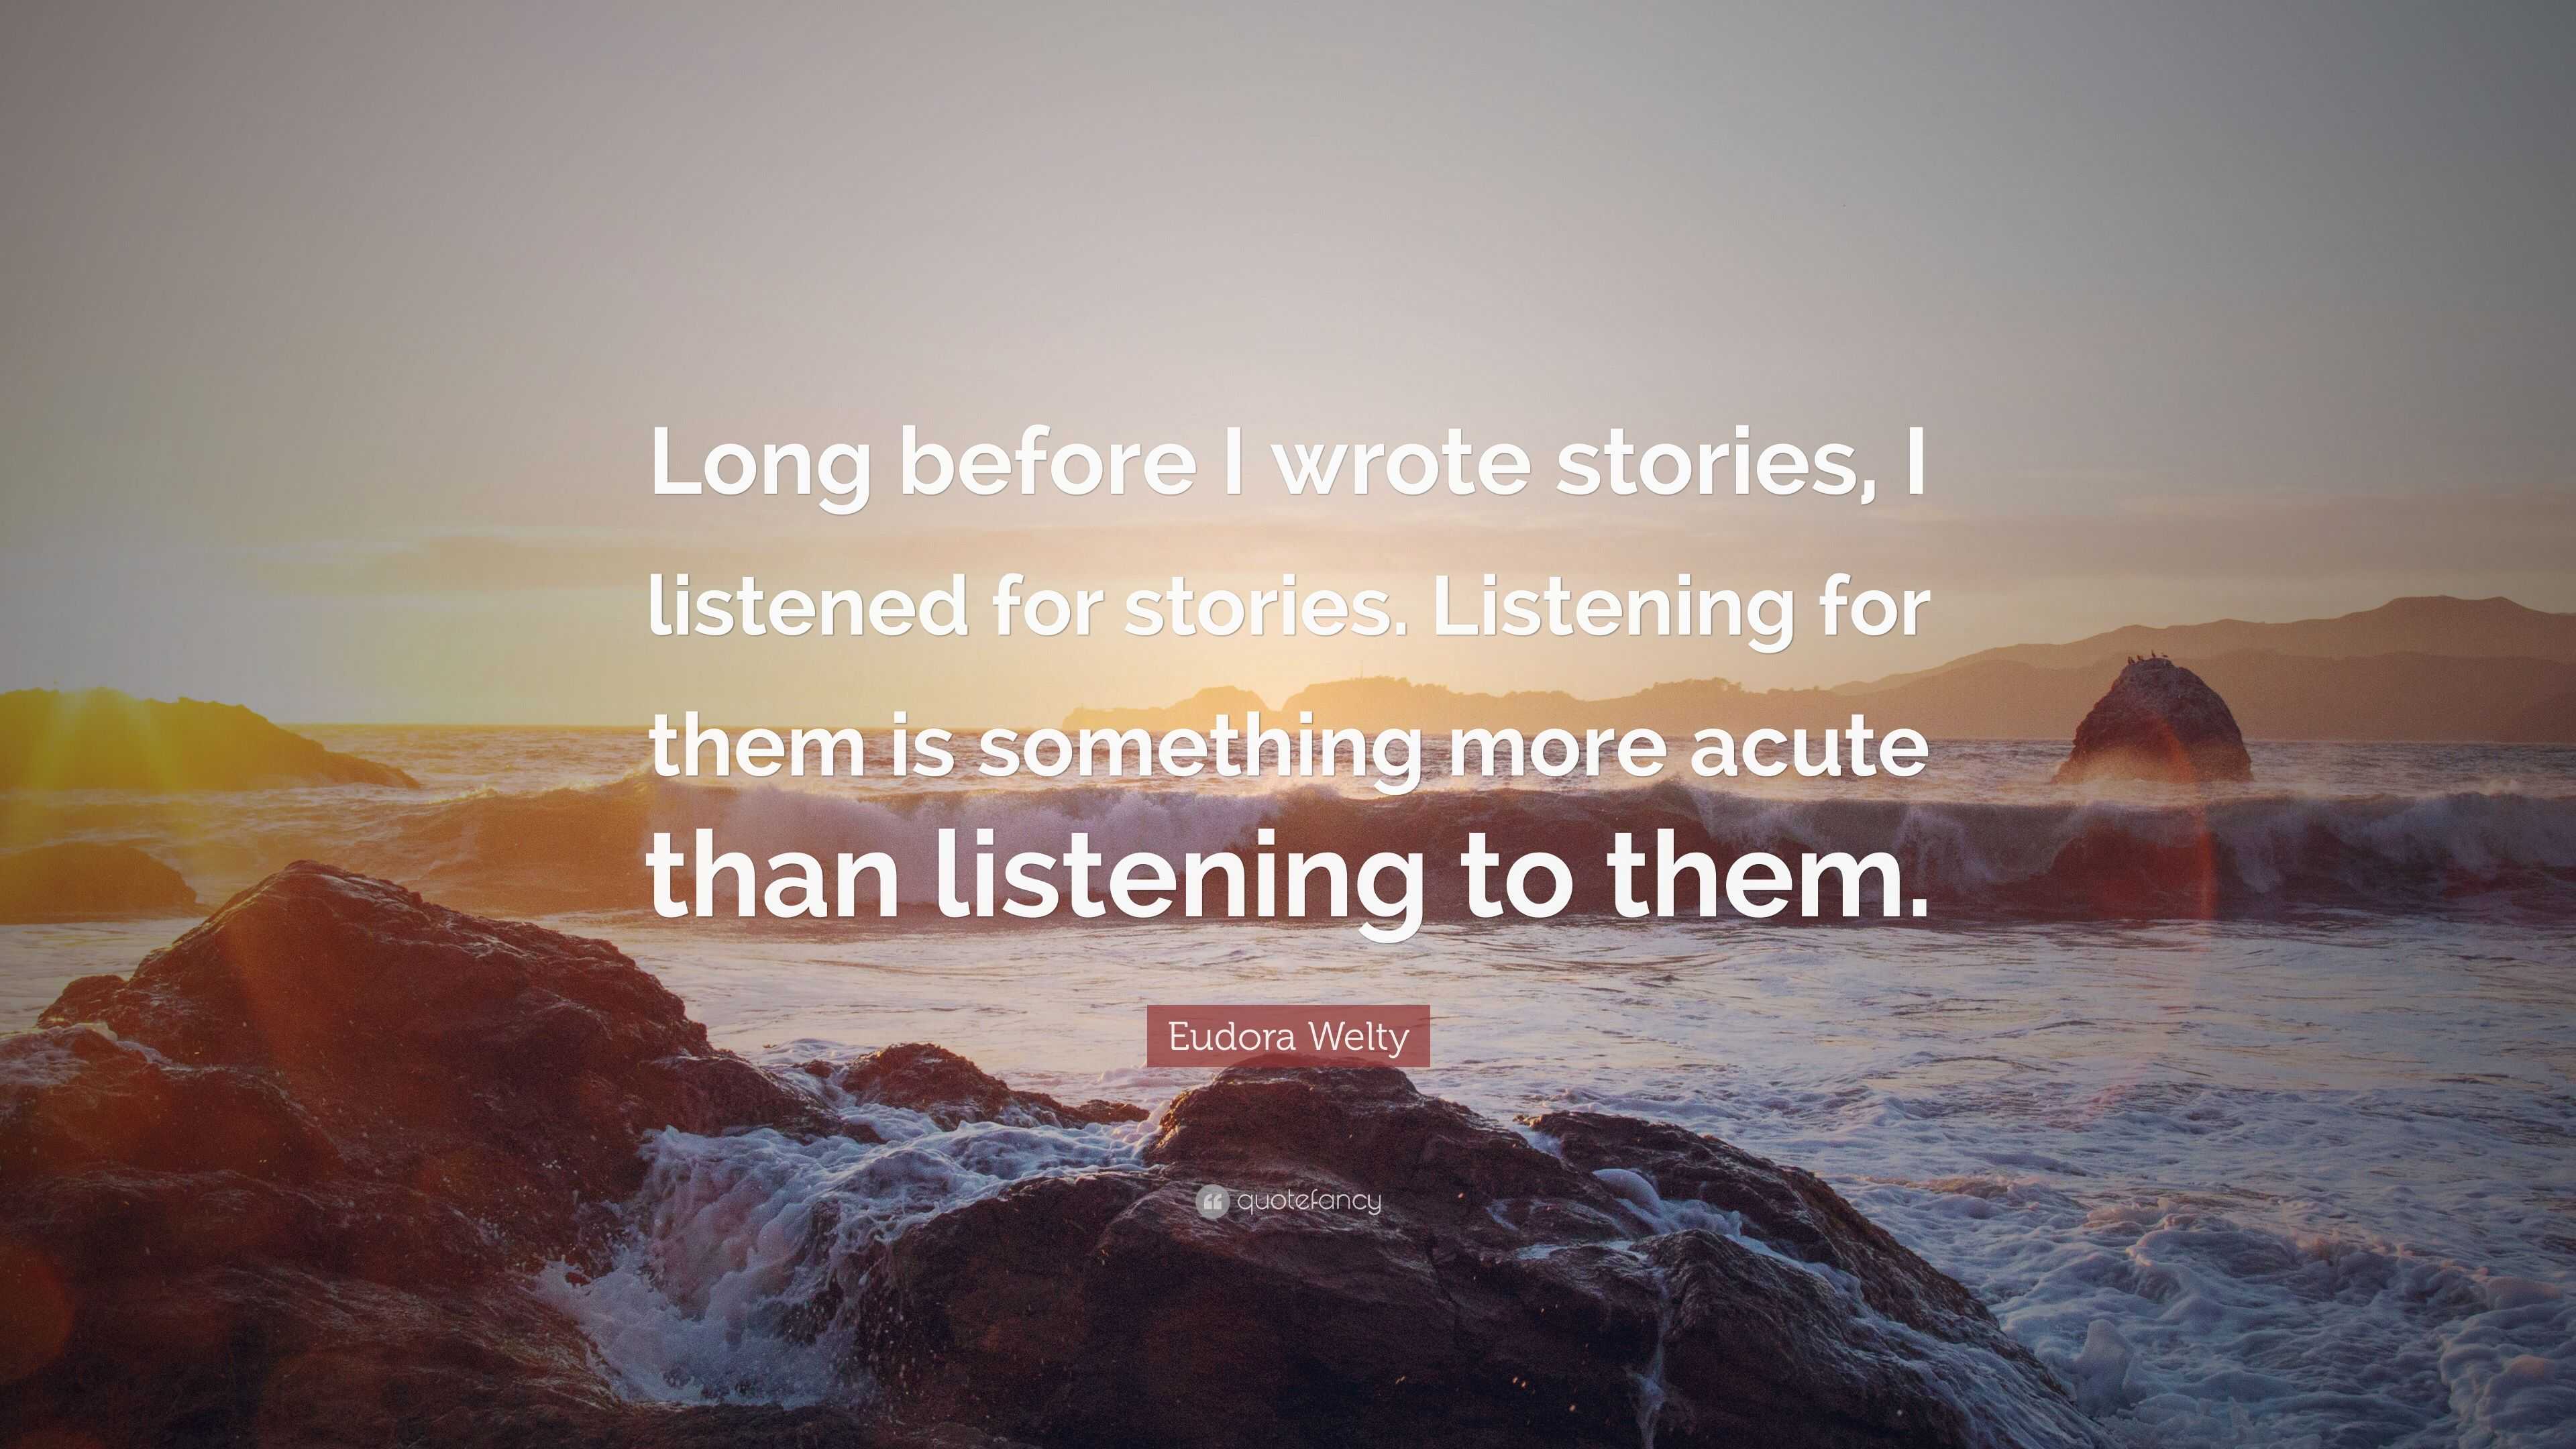 Eudora Welty Quote: “Long before I wrote stories, I listened for ...